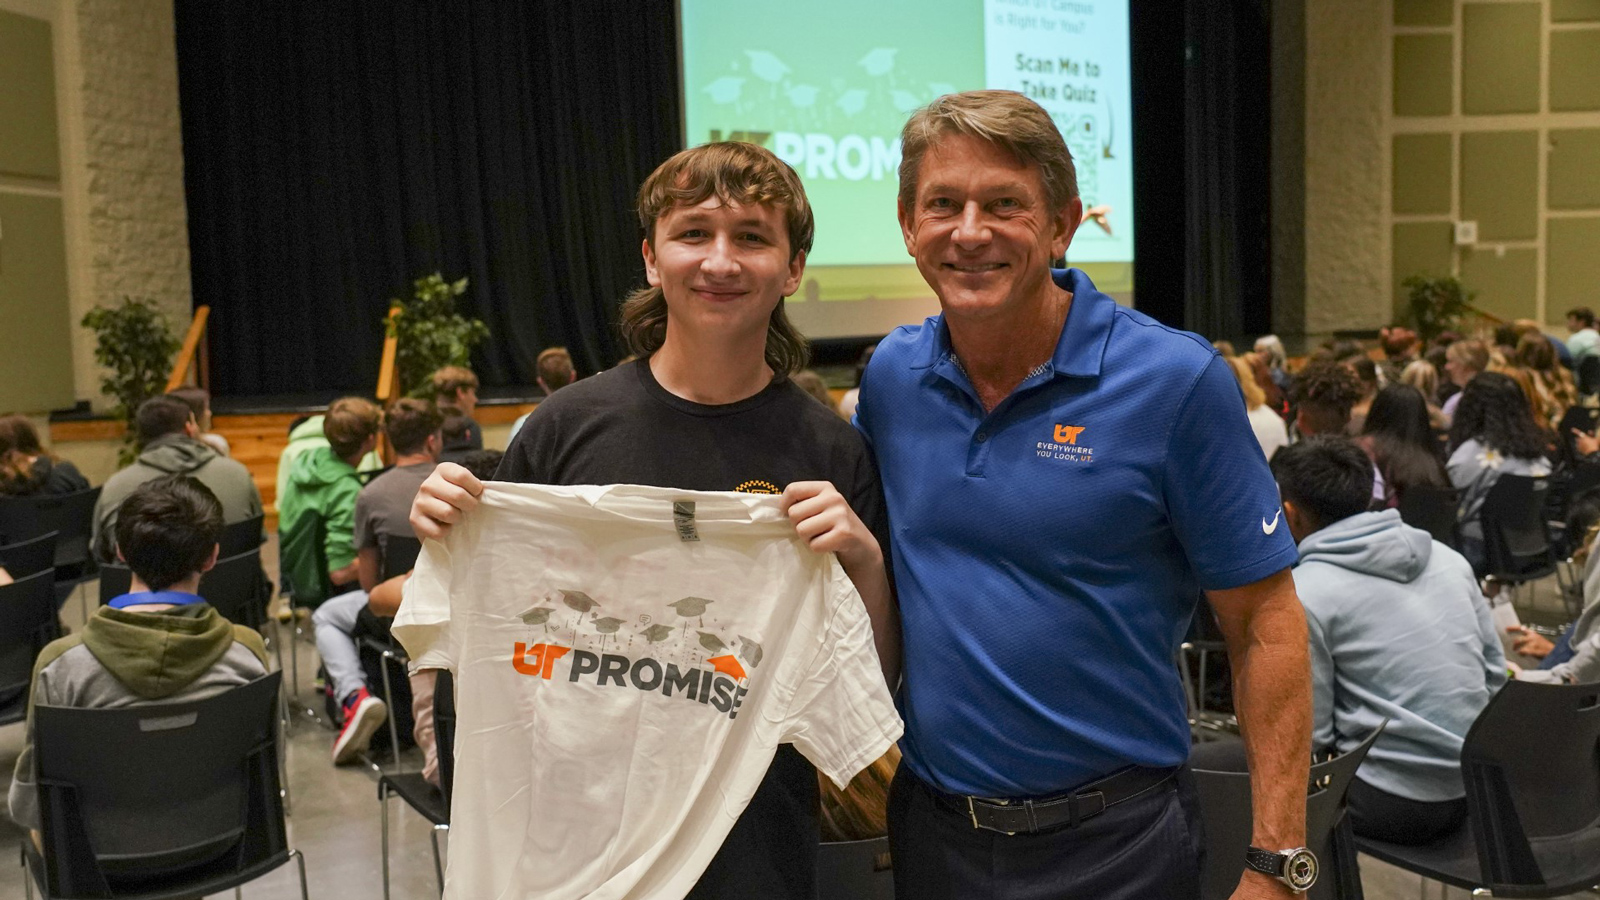 UT System President Randy Boyd posed next to a high school student at a UT Promise tour stop.